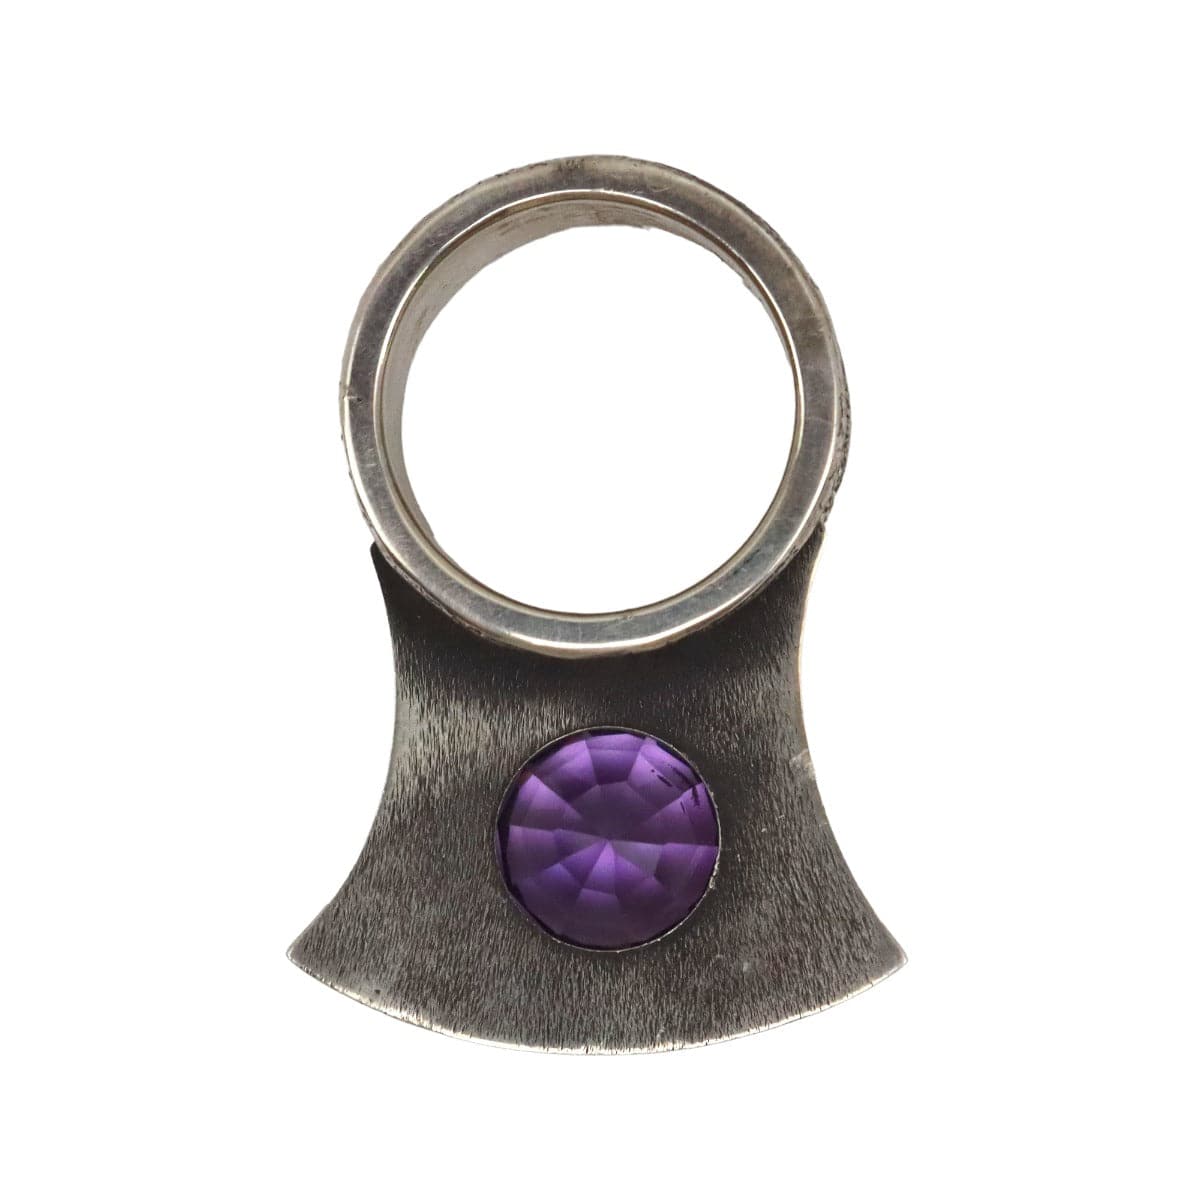 Frank Patania Jr. - Amethyst and Sterling Silver Asymmetrical Ring c. 2012, size 9 (J15529)